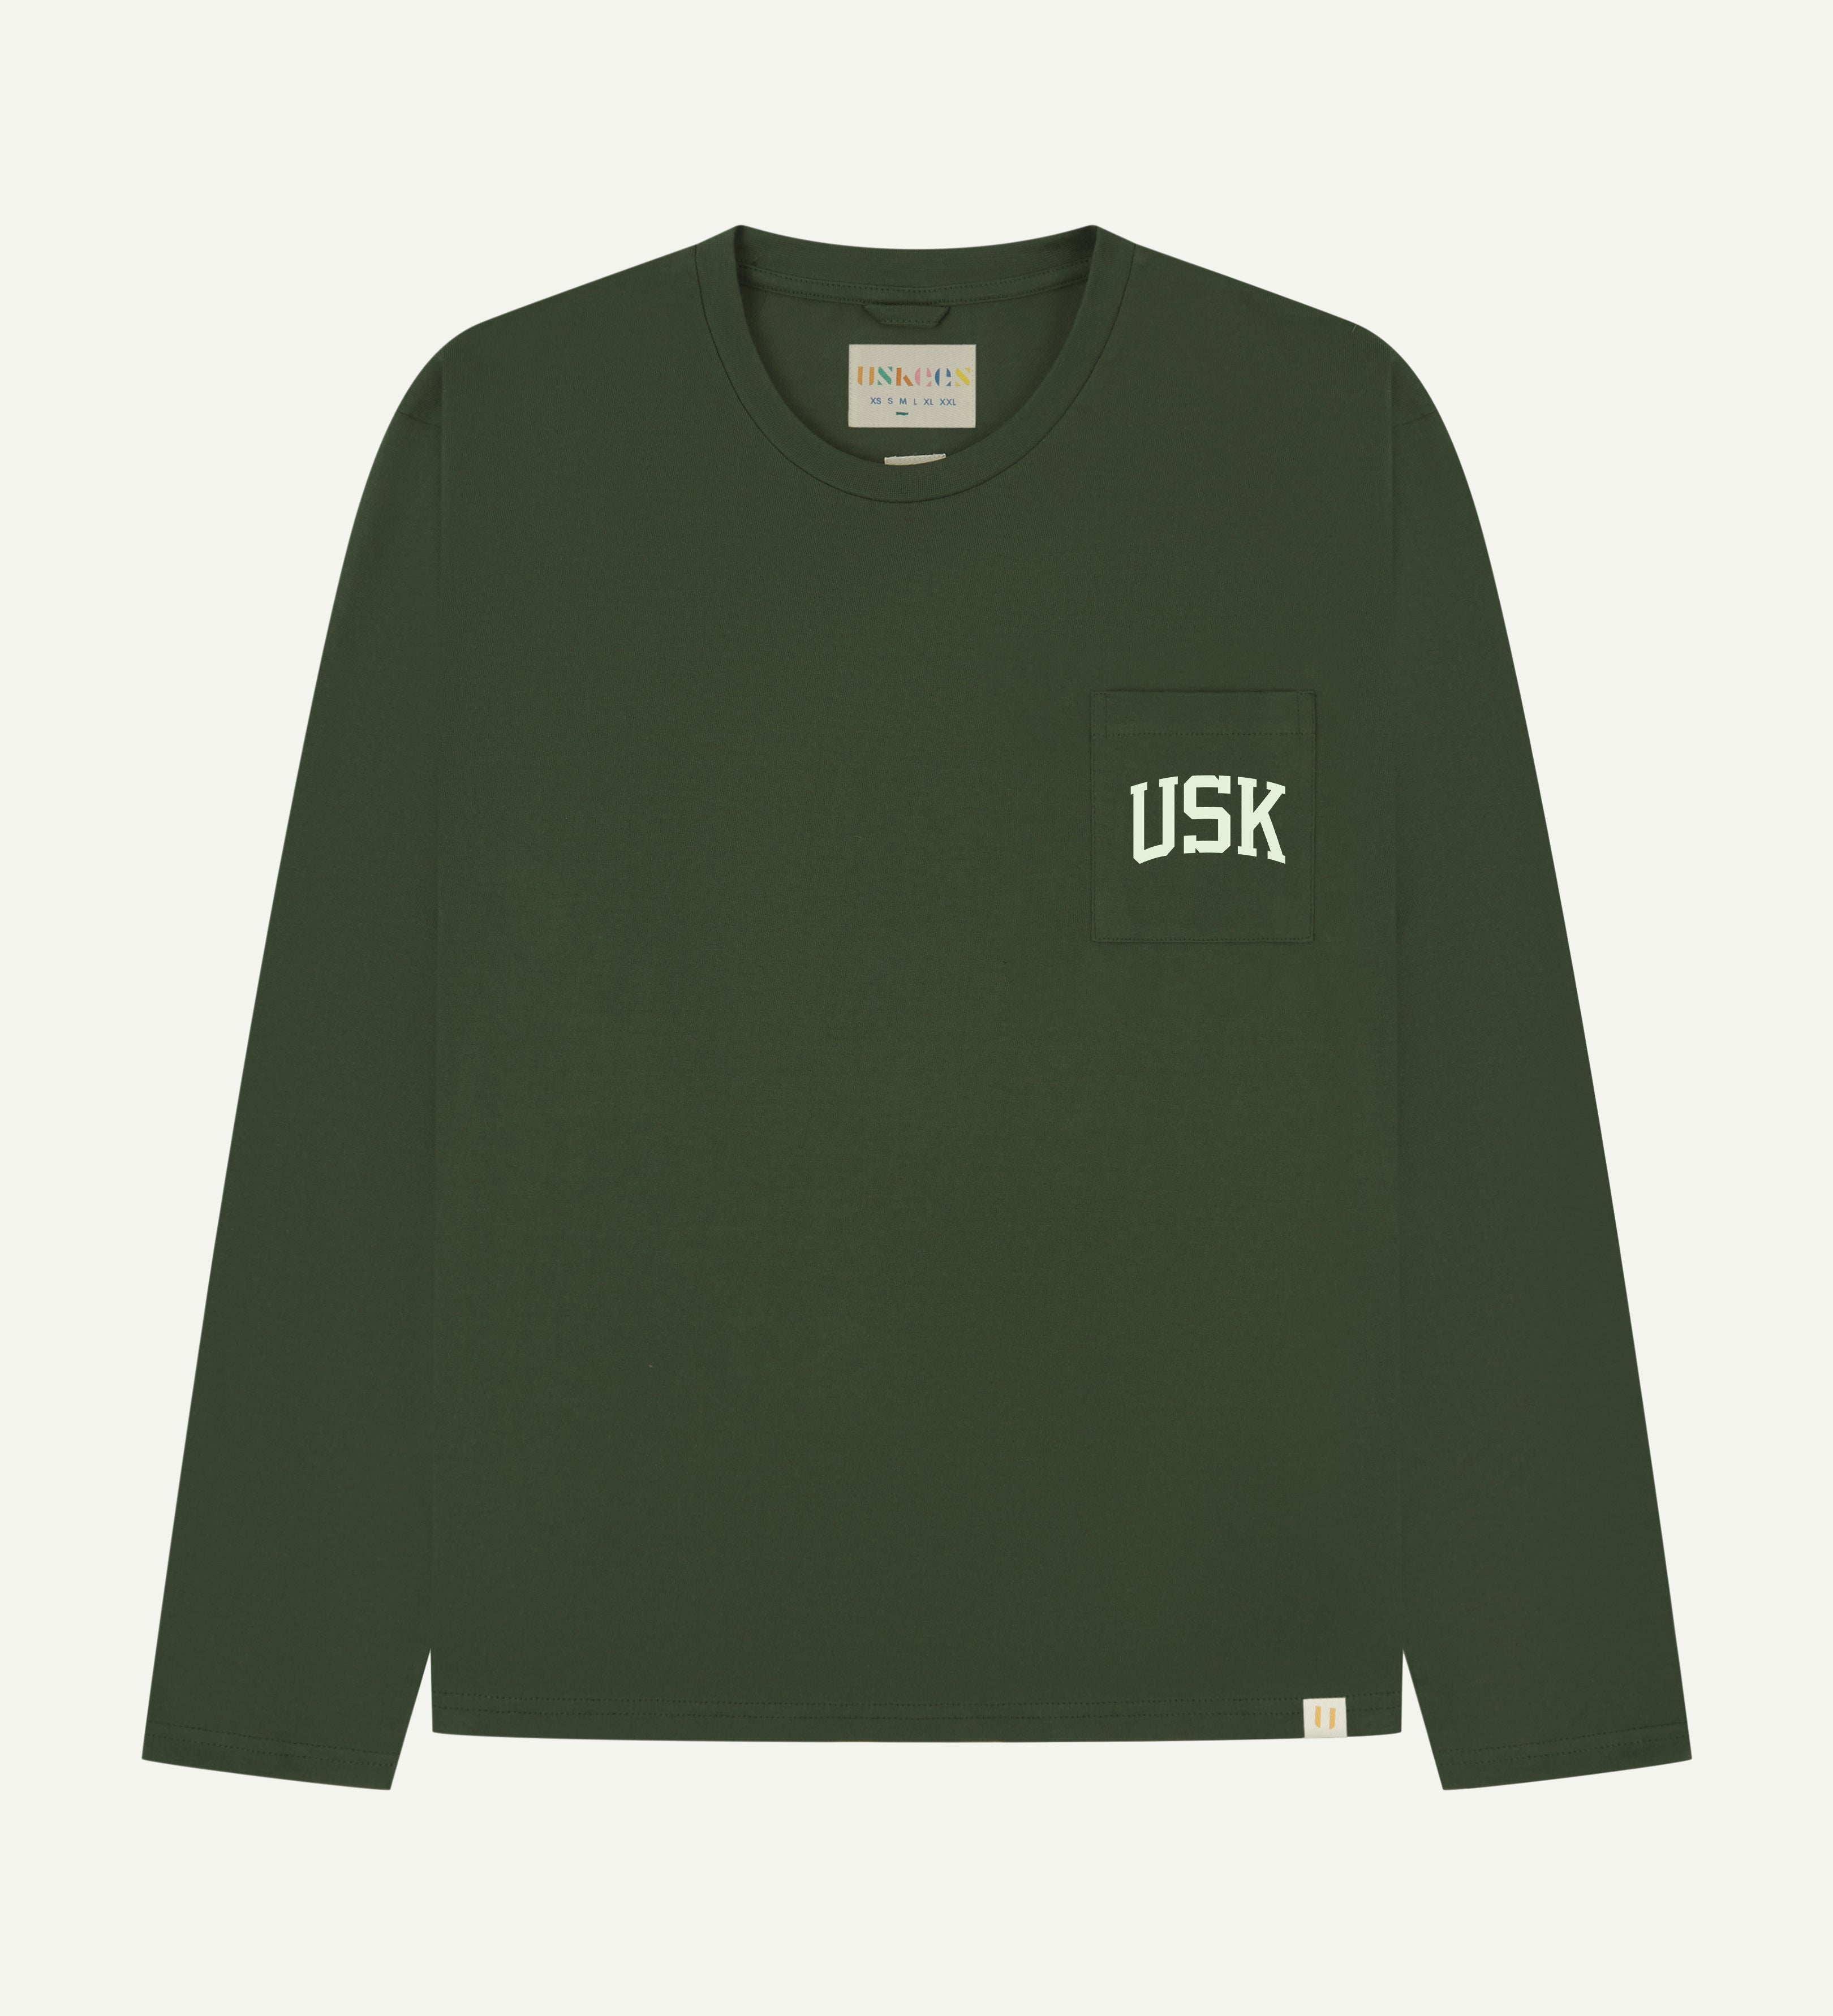 front flat shot of the uskees green long sleeved Tee for men showing the white USK logo on the chest pocket